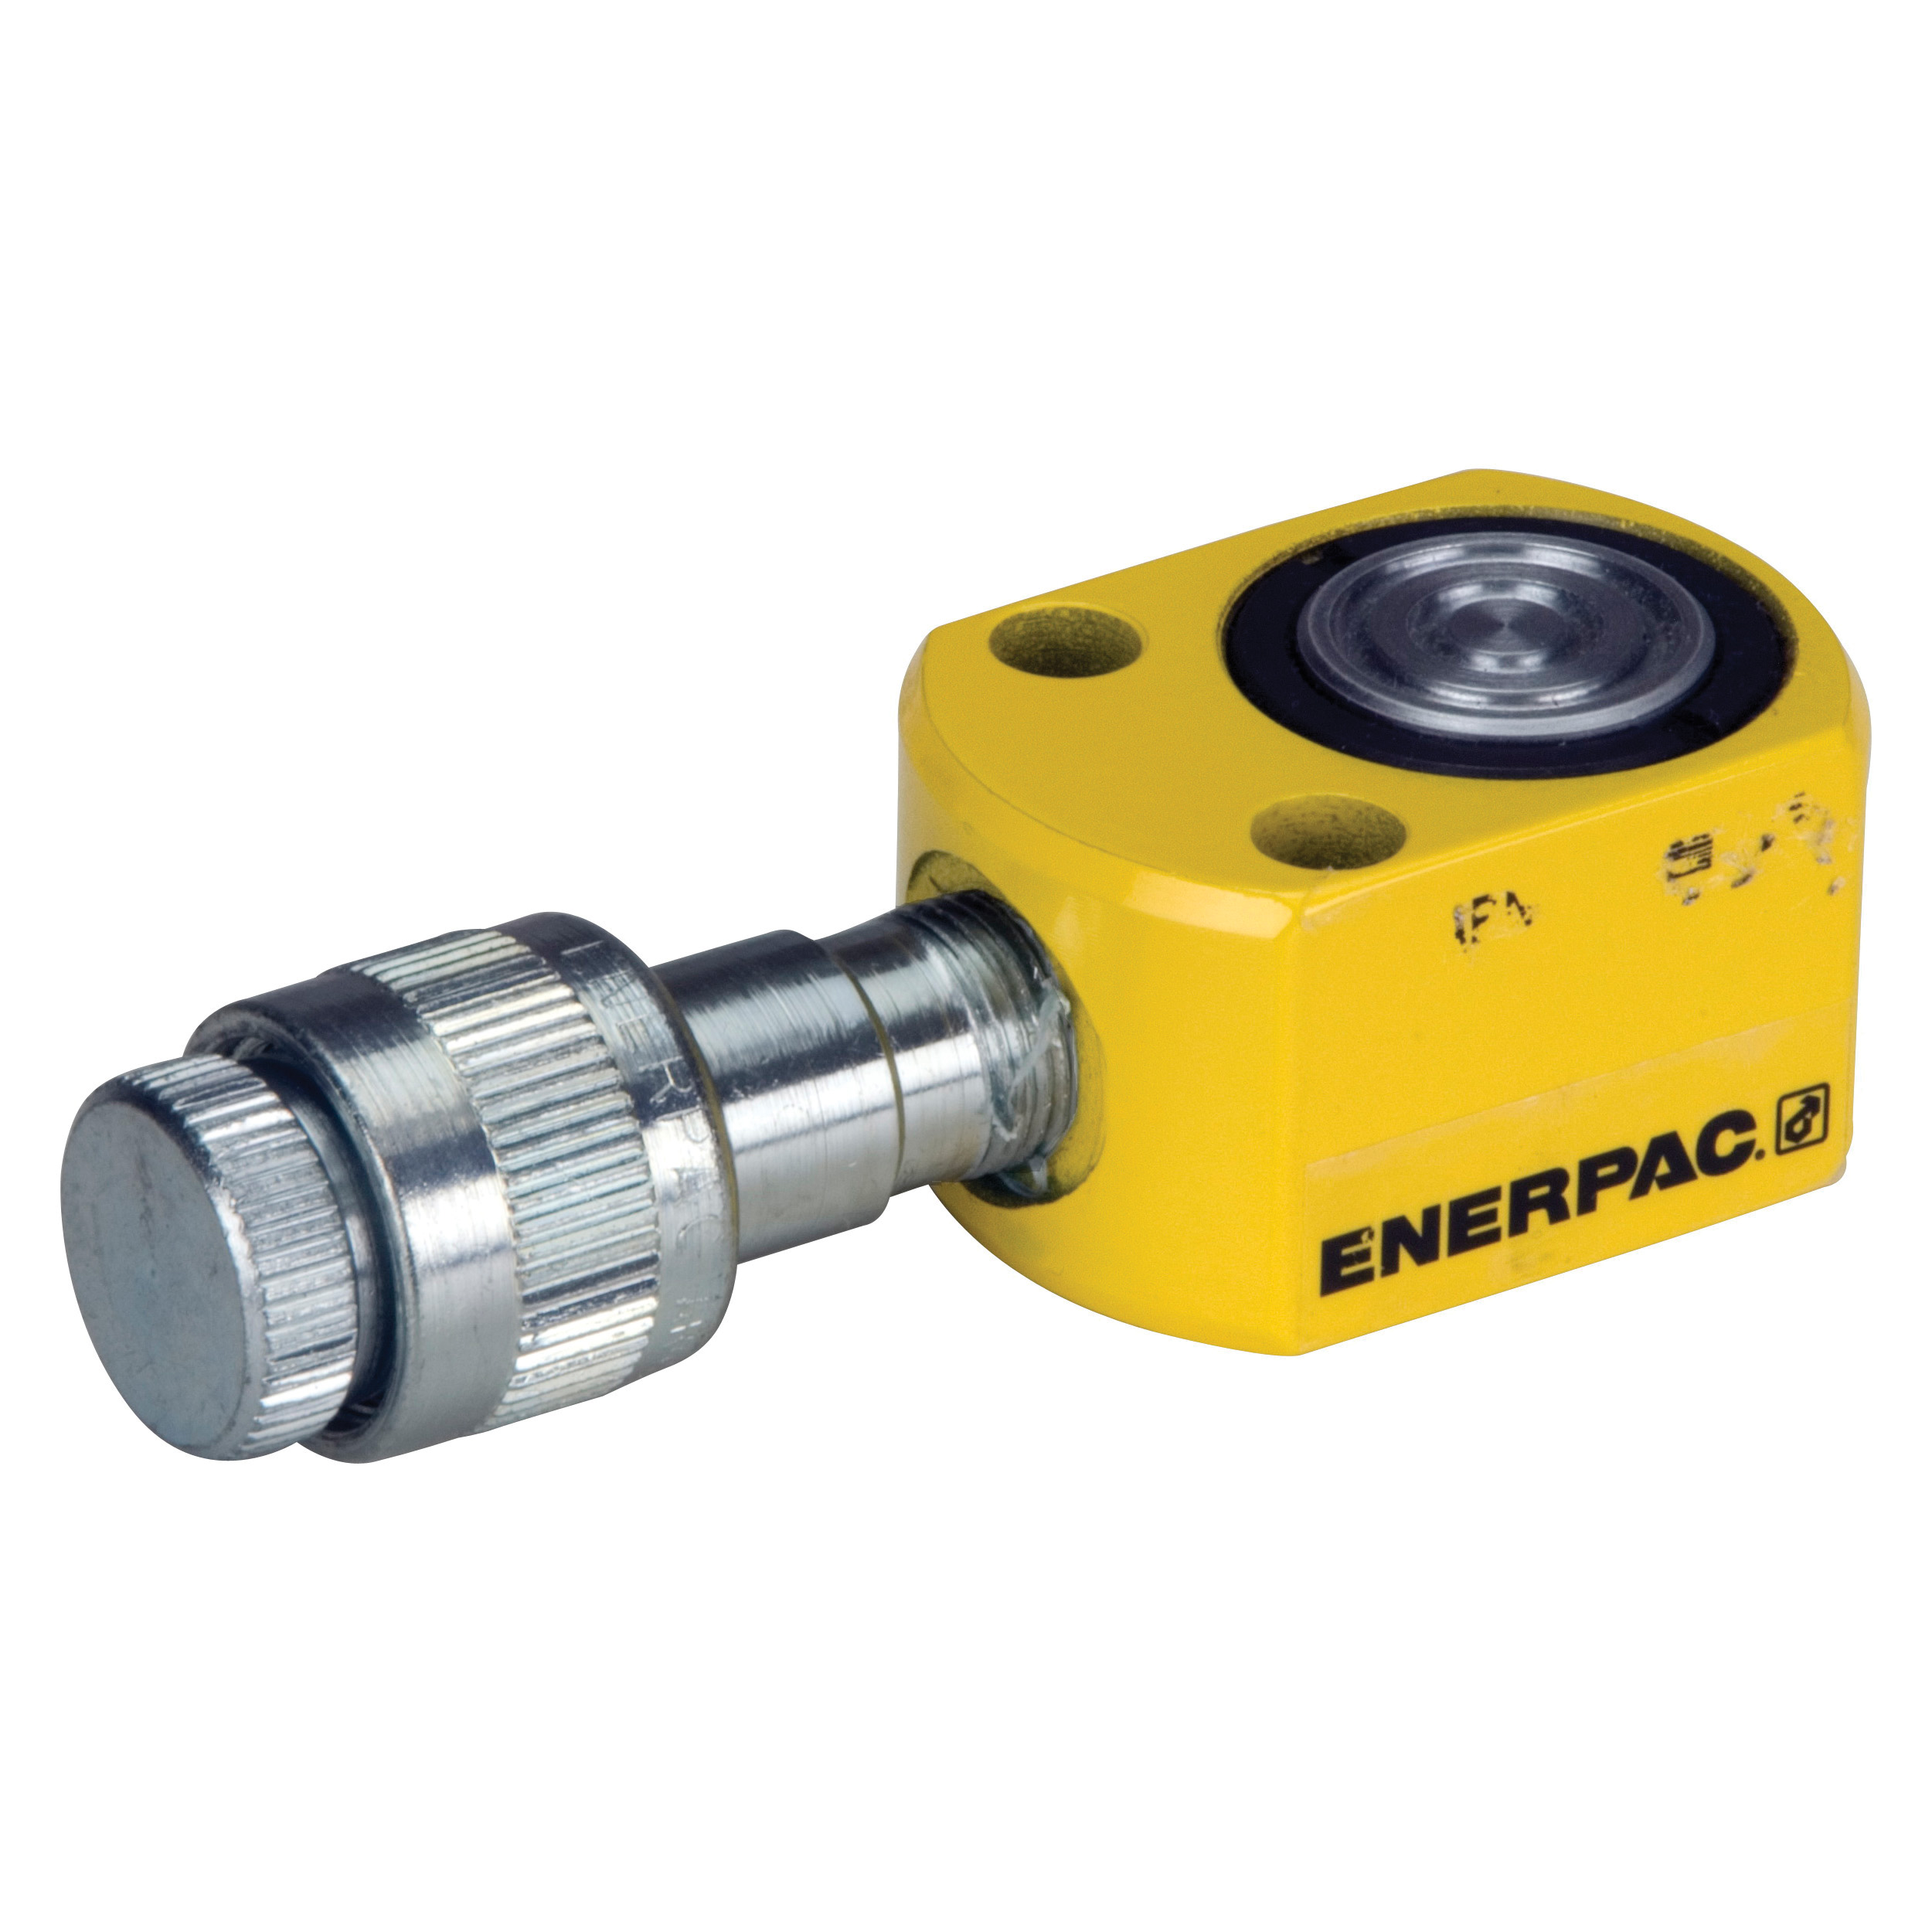 Enerpac® Flat-Jac® RCS-502 Low Height Single Acting Spring Return Hydraulic Cylinder, 50 ton Capacity, 3-1/2 in Dia Bore, 2.38 in L Stroke, 4.81 in H Retract, 2-3/4 in Dia Rod, 10000 psi